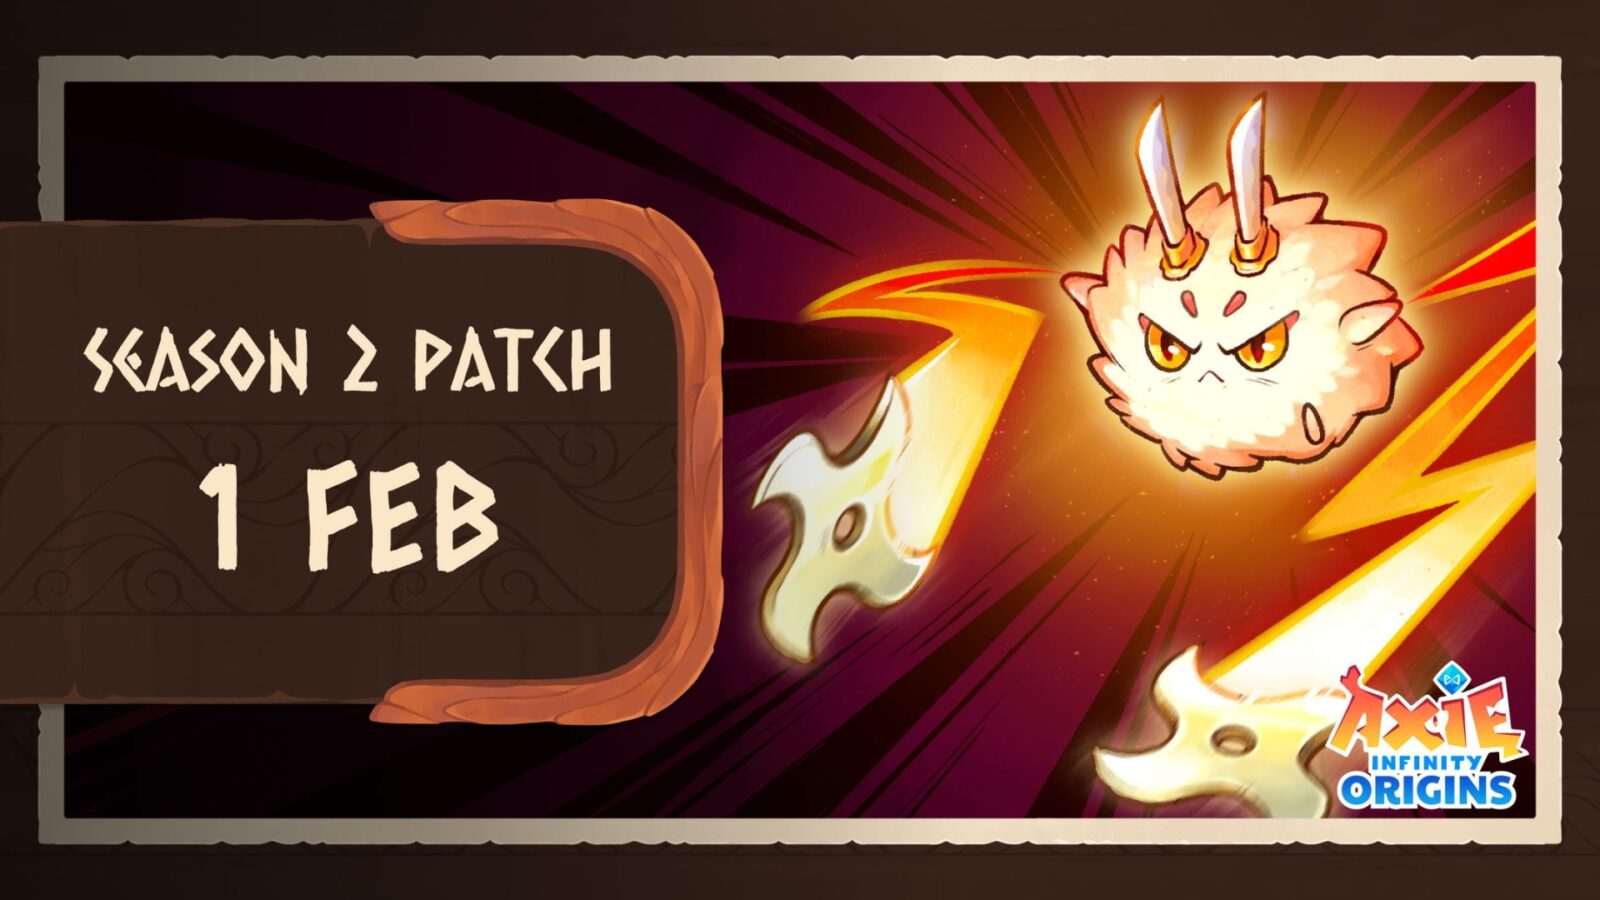 axie infinity origins the mystic era begins As the Epic era is over, Axie Infinity Origins announced the start of a new exciting era. It's now verified, the Mystic Era has begun!